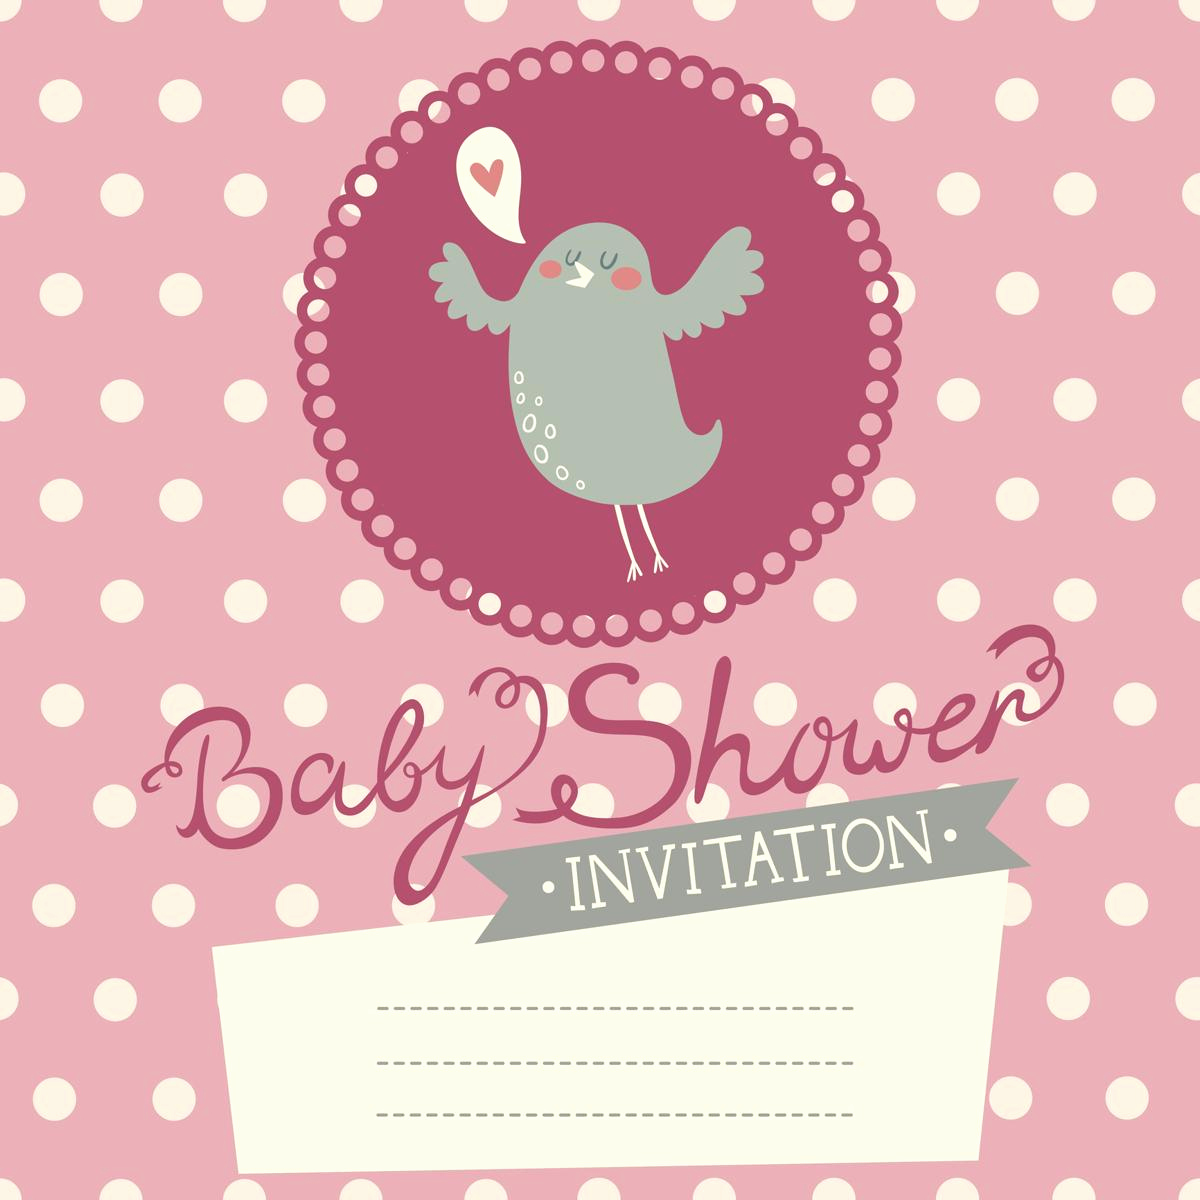 Baby Shower Invitation Images Inspirational Free Printable Baby Sprinkle Invitations